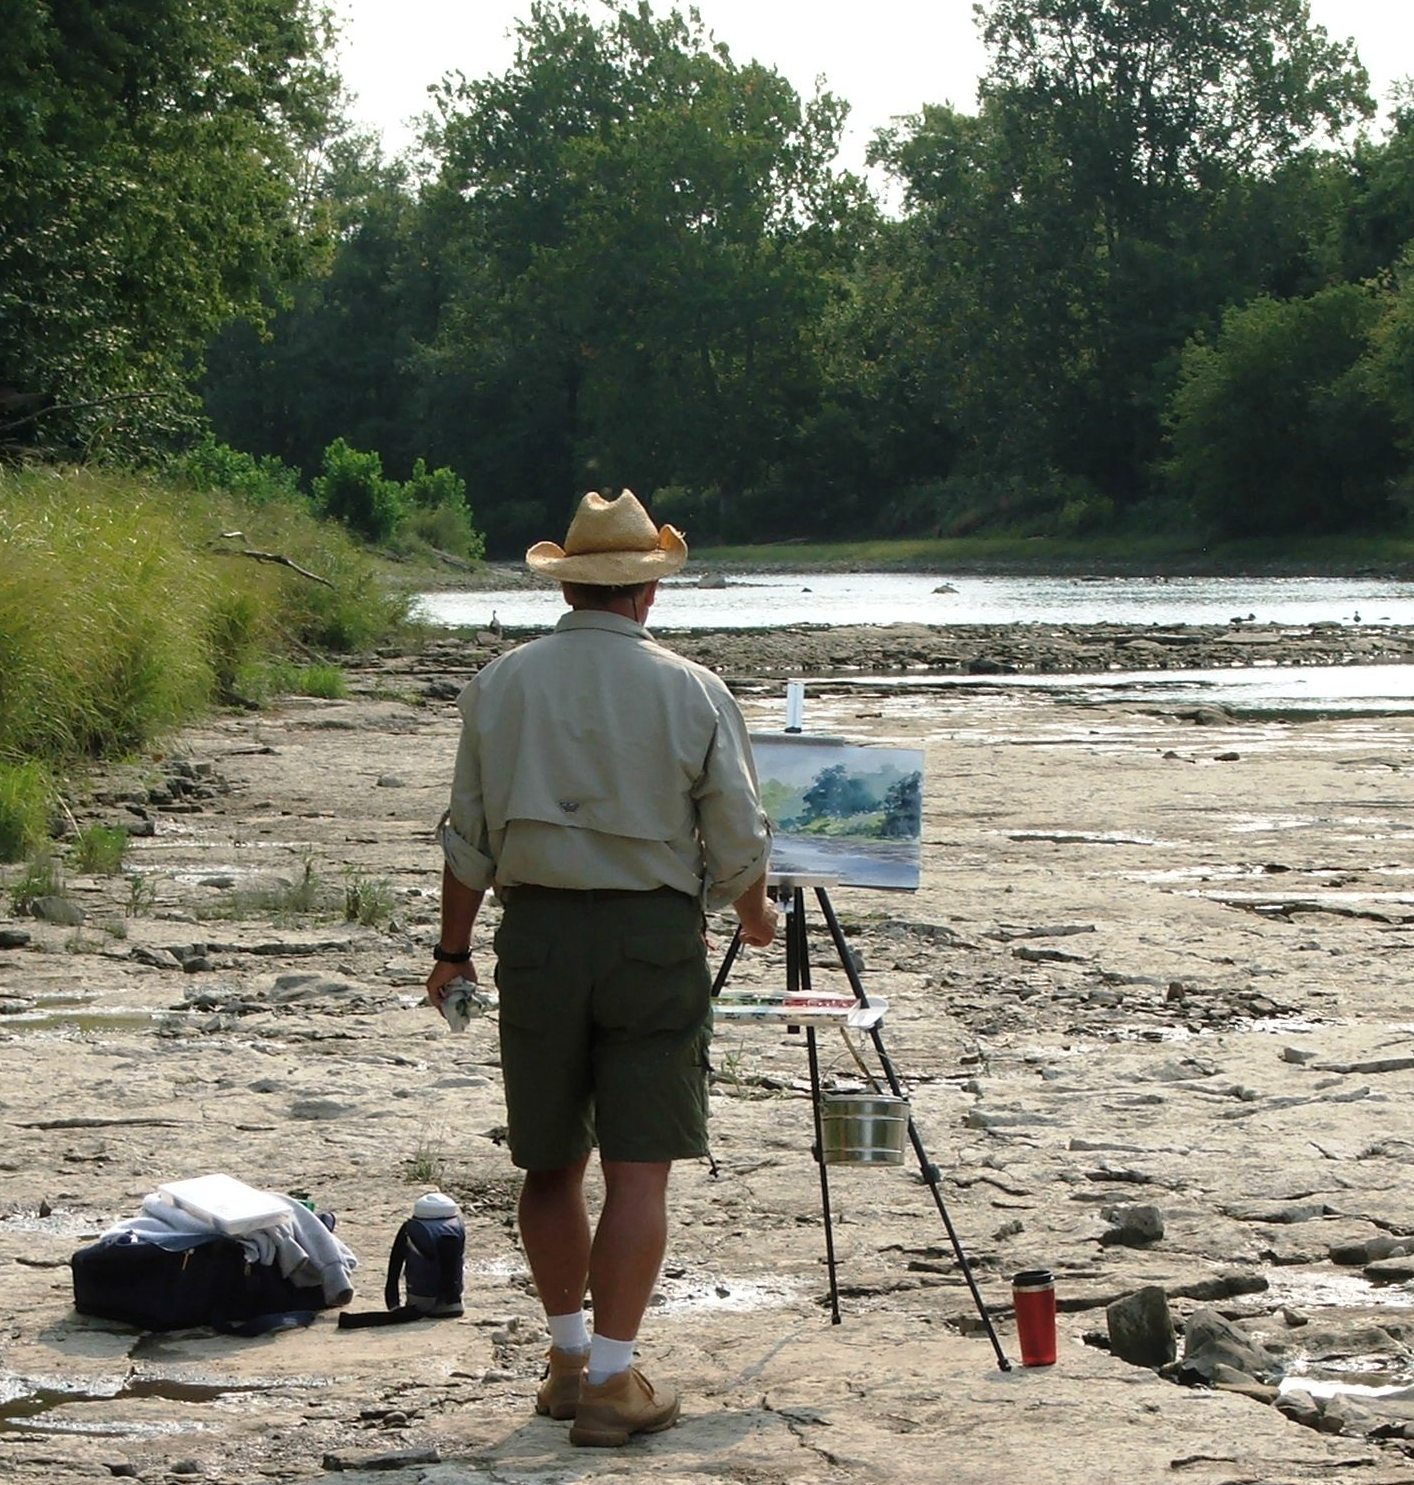 Maumee River - With the "Monday Morning Painters"